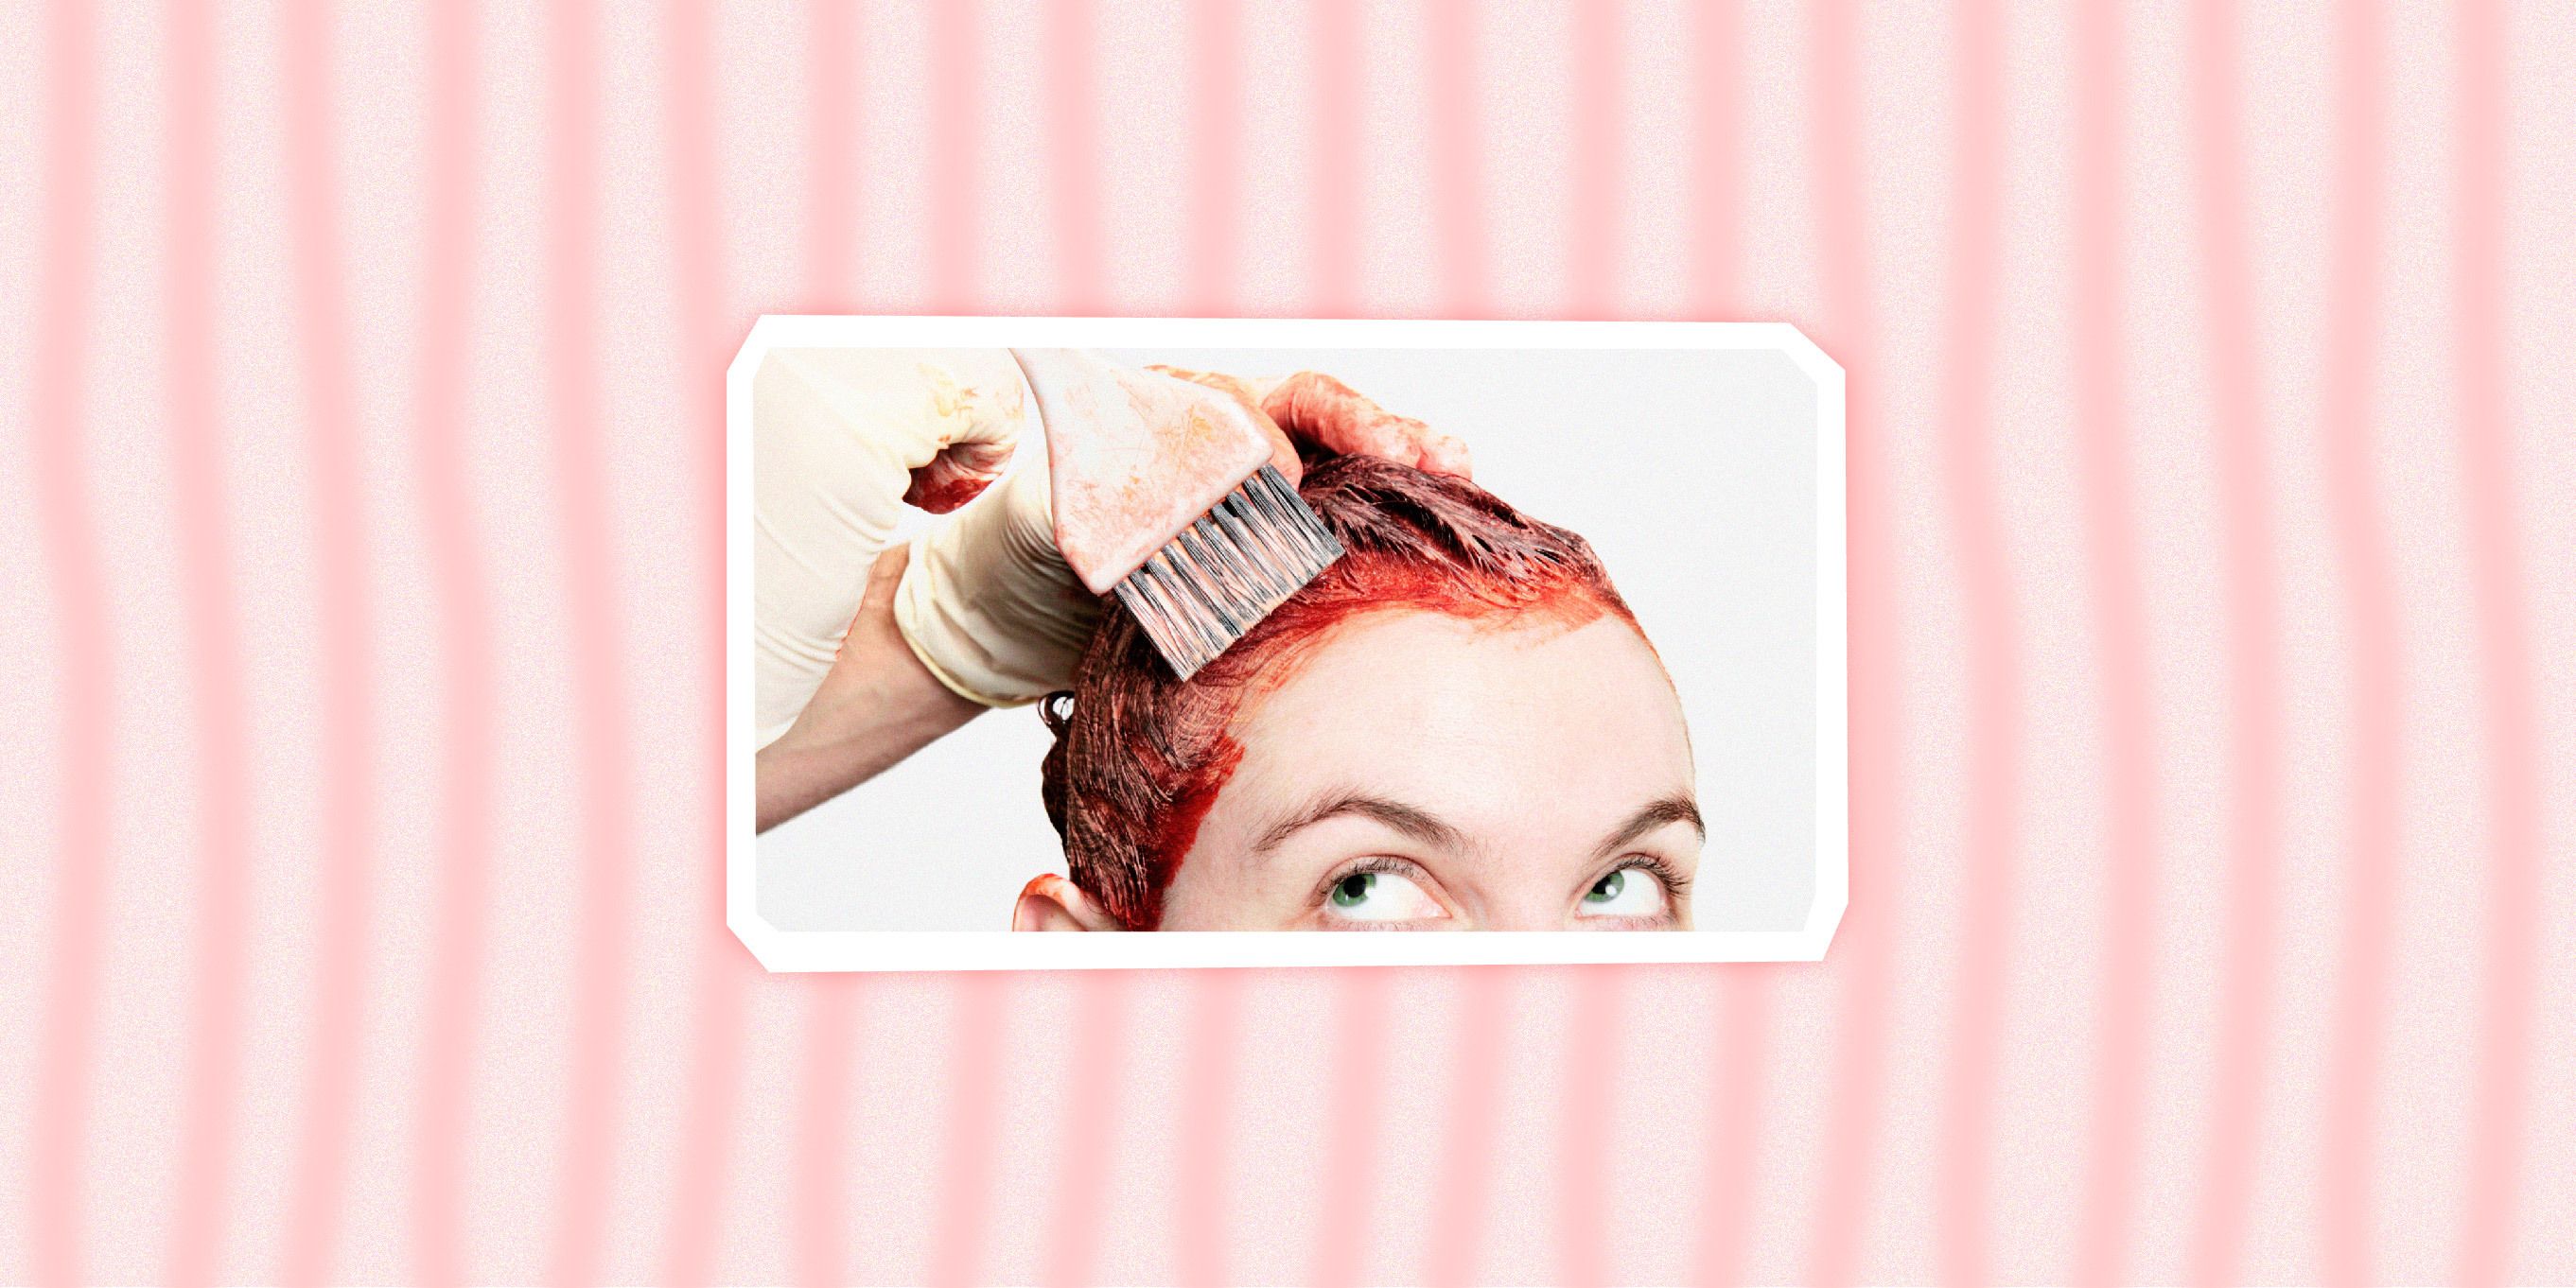 20 Ways to Get Hair Dye Off Your Skin and Out of Your Clothes - How to Get Hair  Dye Off Skin and Clothes